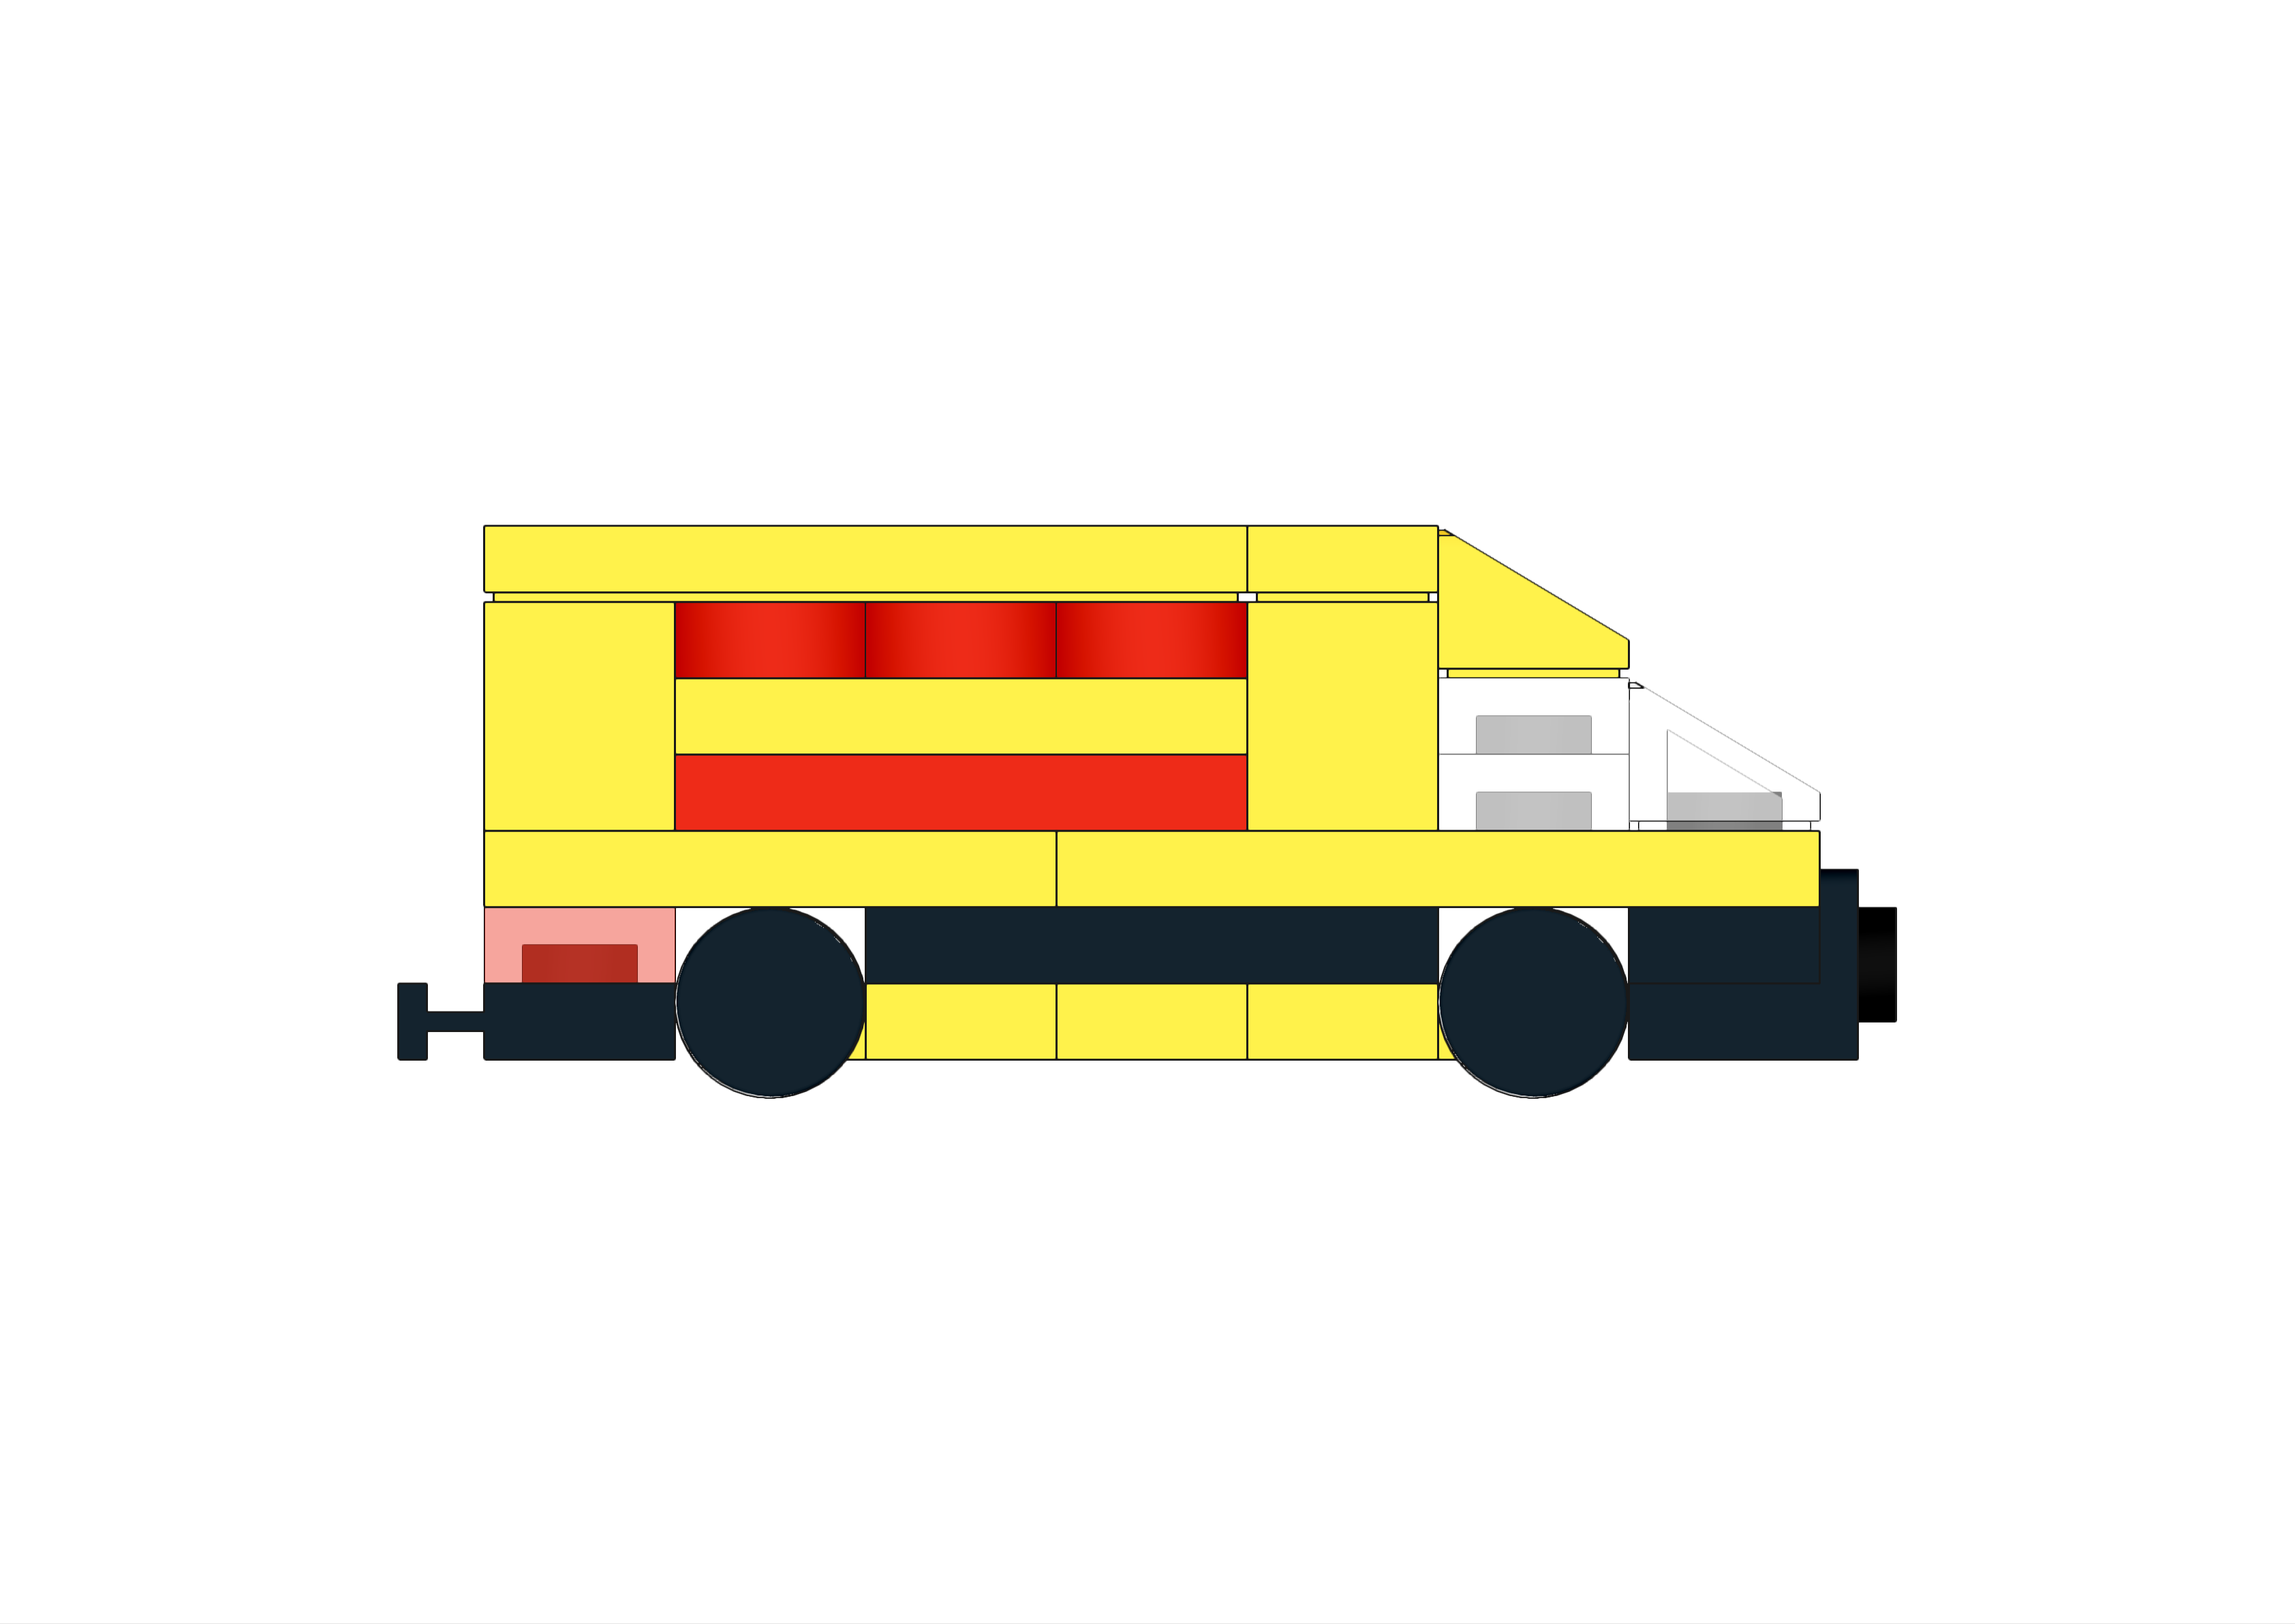 Alternate side view image of the LEGO Micro DHL Delivery Van MOC.